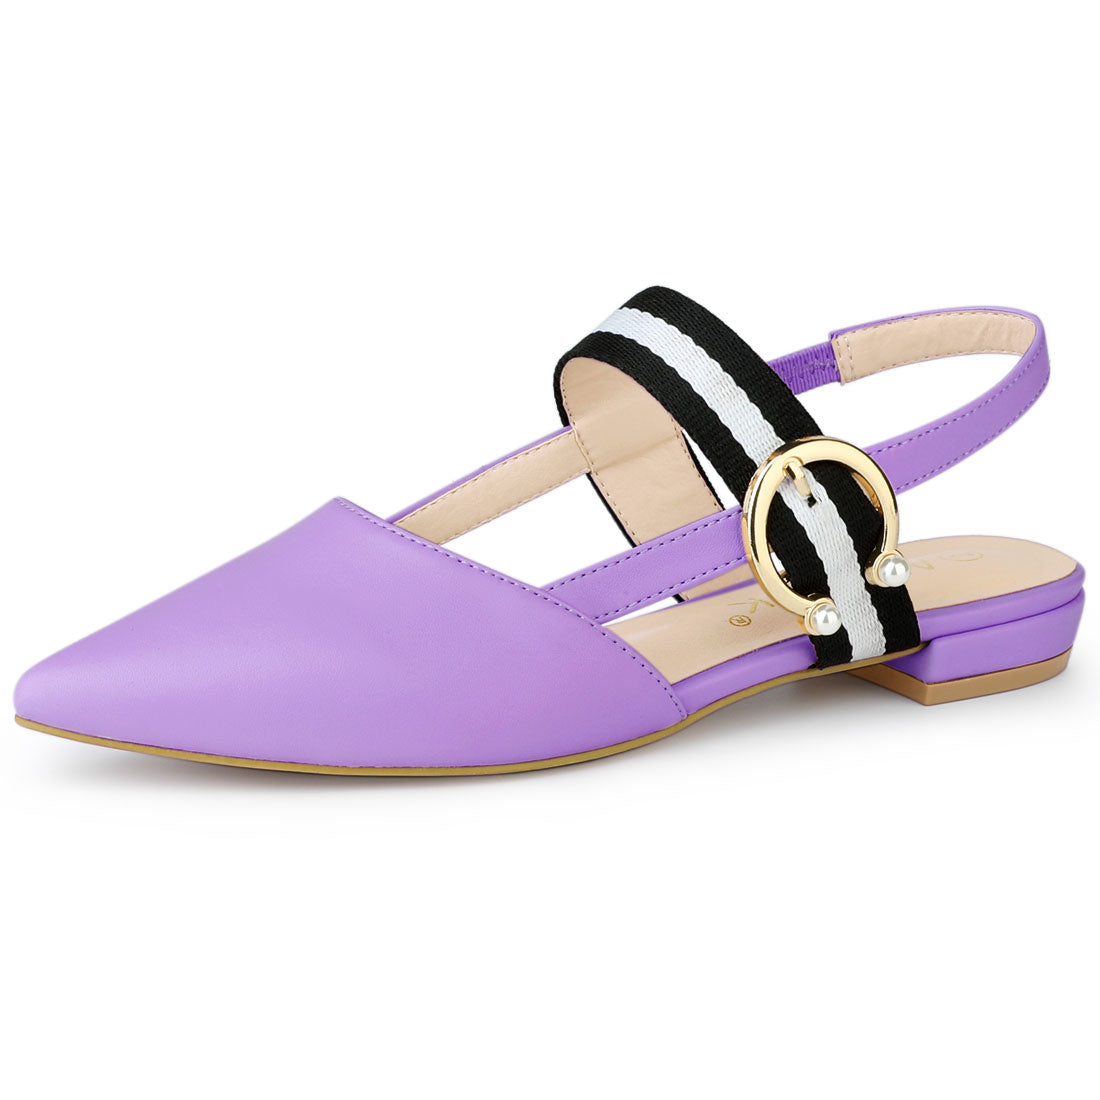 Allegra K Pointed Toe Contrast Color Slingback PU Leather Flat Mules